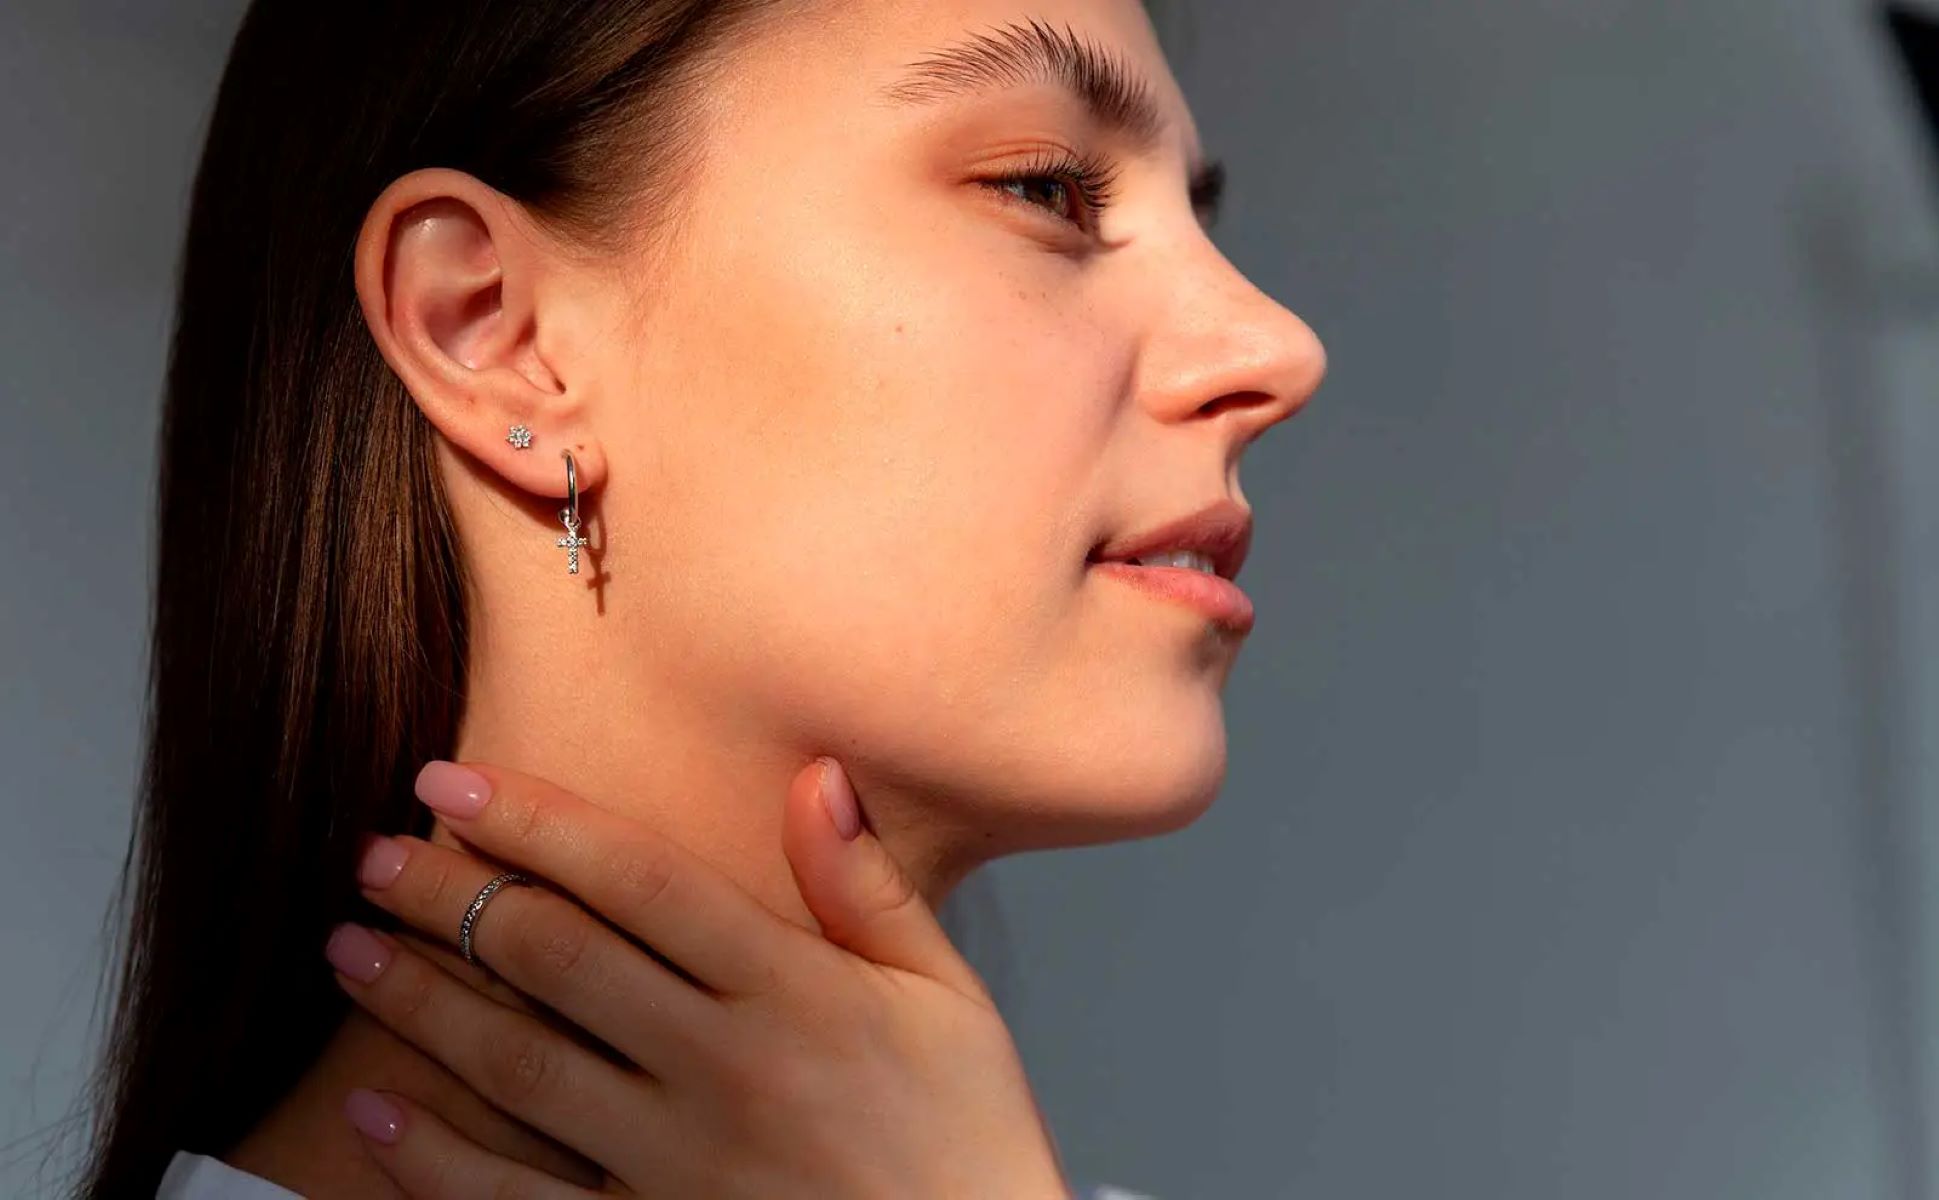 Sleeping With Dangly Earrings: Is It Safe Or A Risky Fashion Statement?